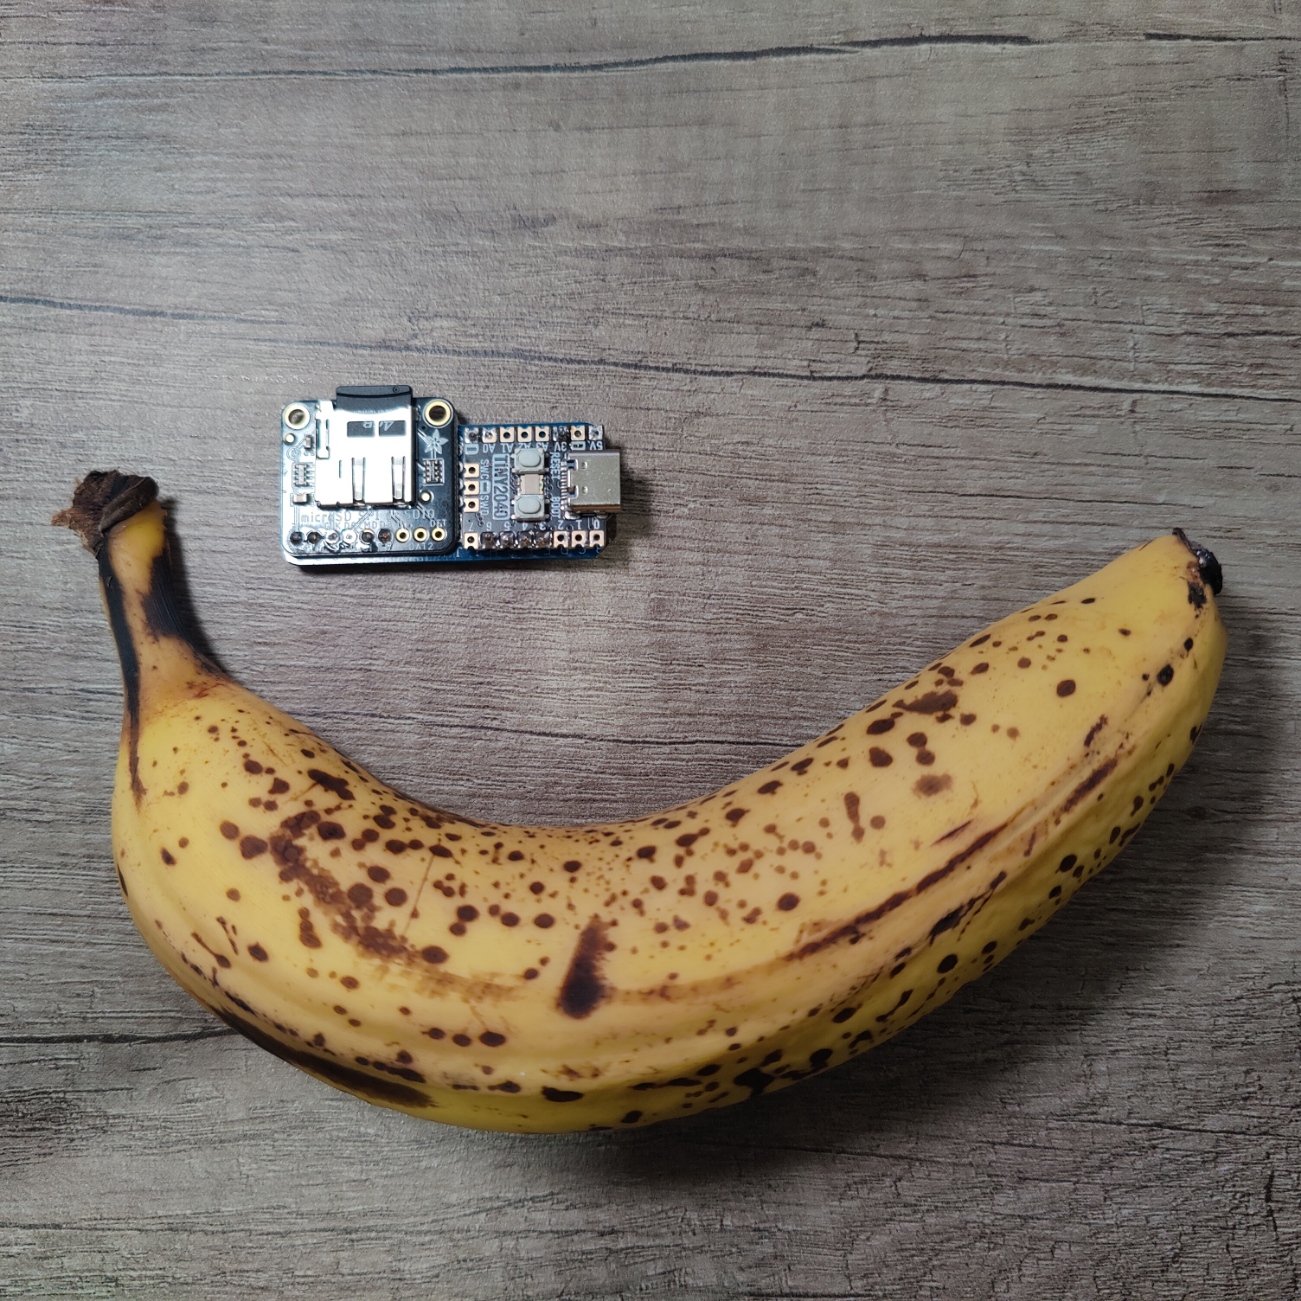 Assembled TinyCPM - Tin2040 and Micro SD card Reader, banana for scale